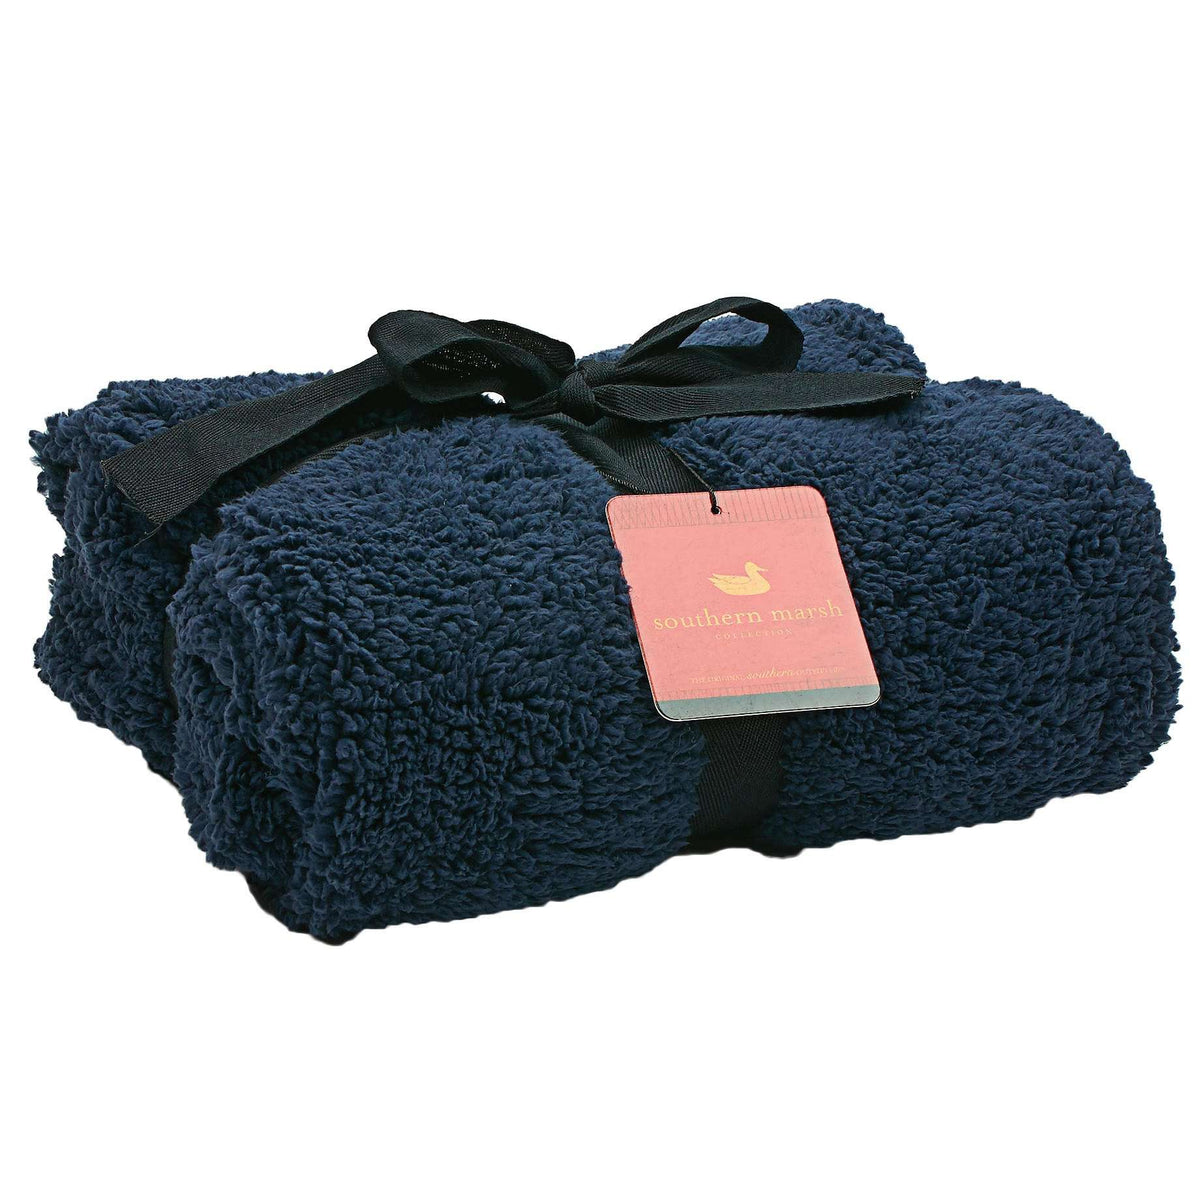 Watson Fluffy Pile & Tartan Blanket in Colonial Navy by Southern Marsh - Country Club Prep